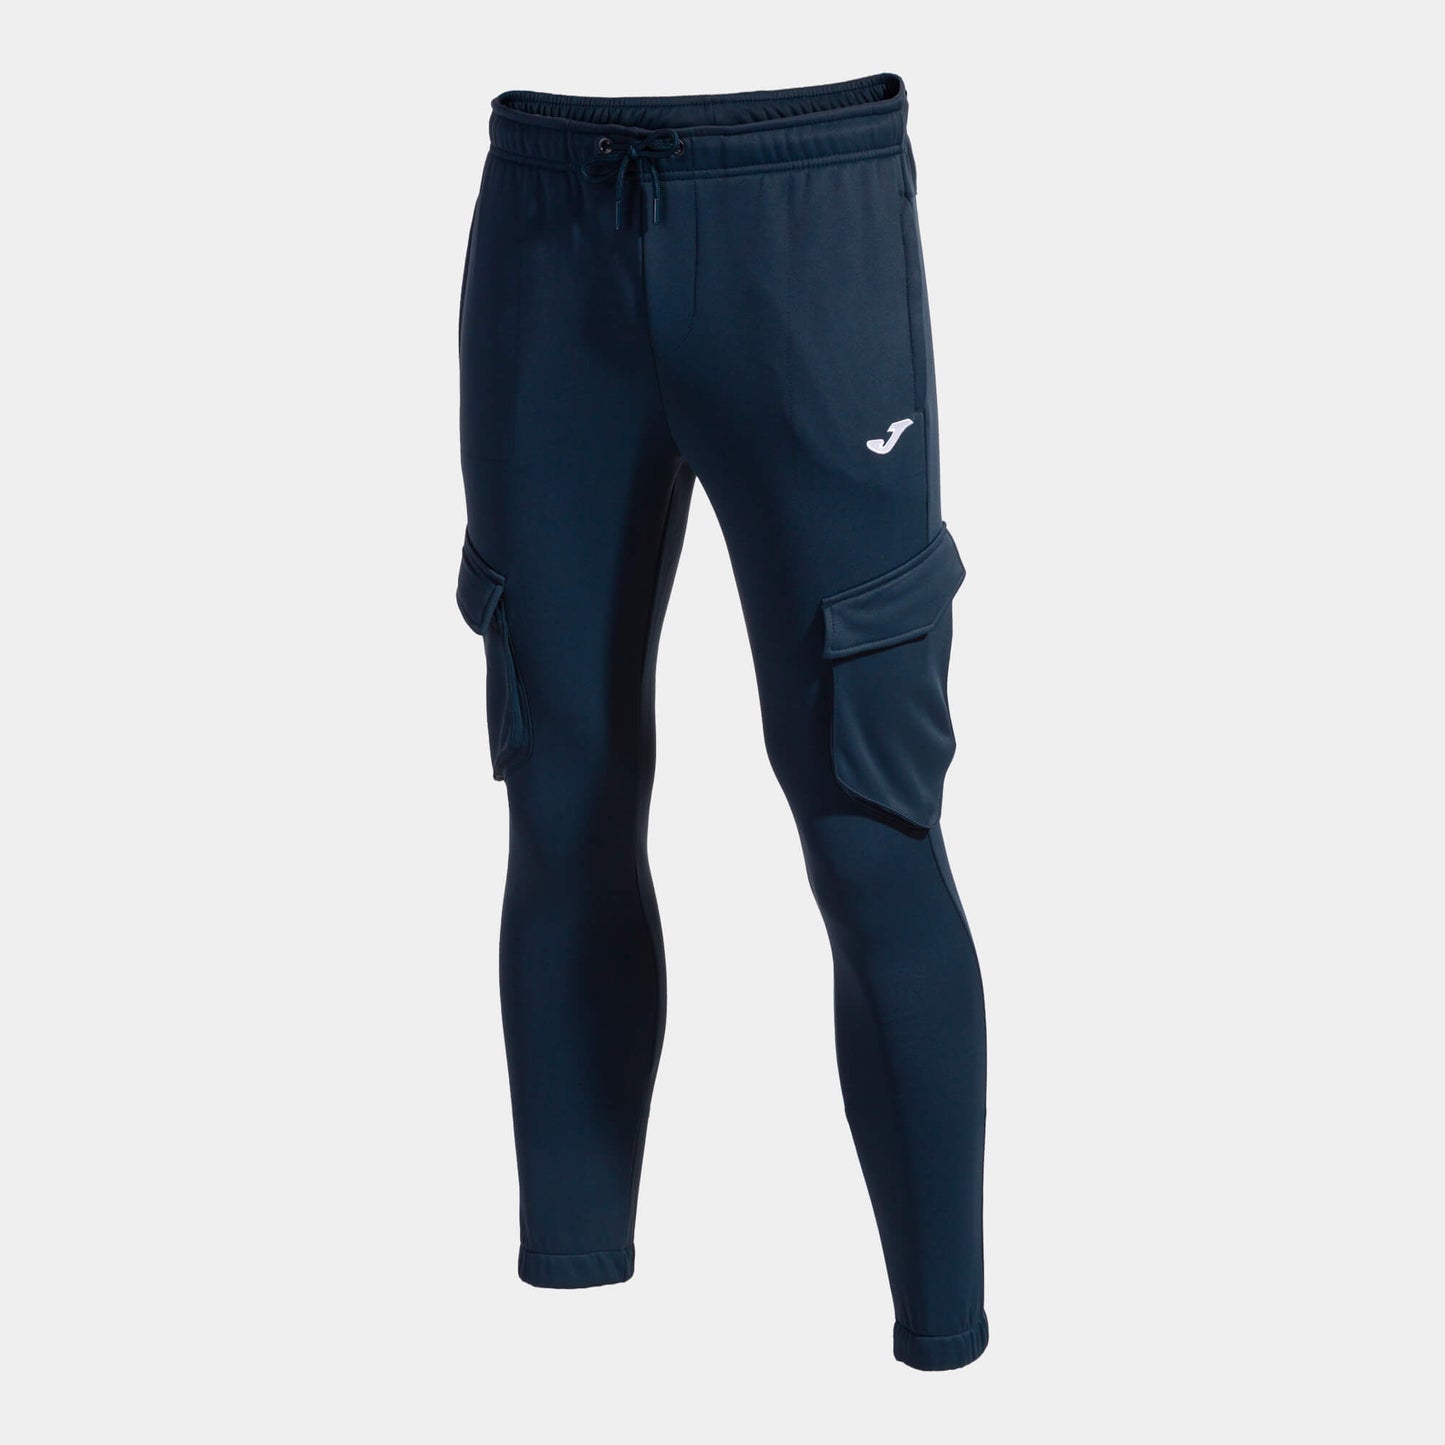 Joma YOUTH Campus Pants